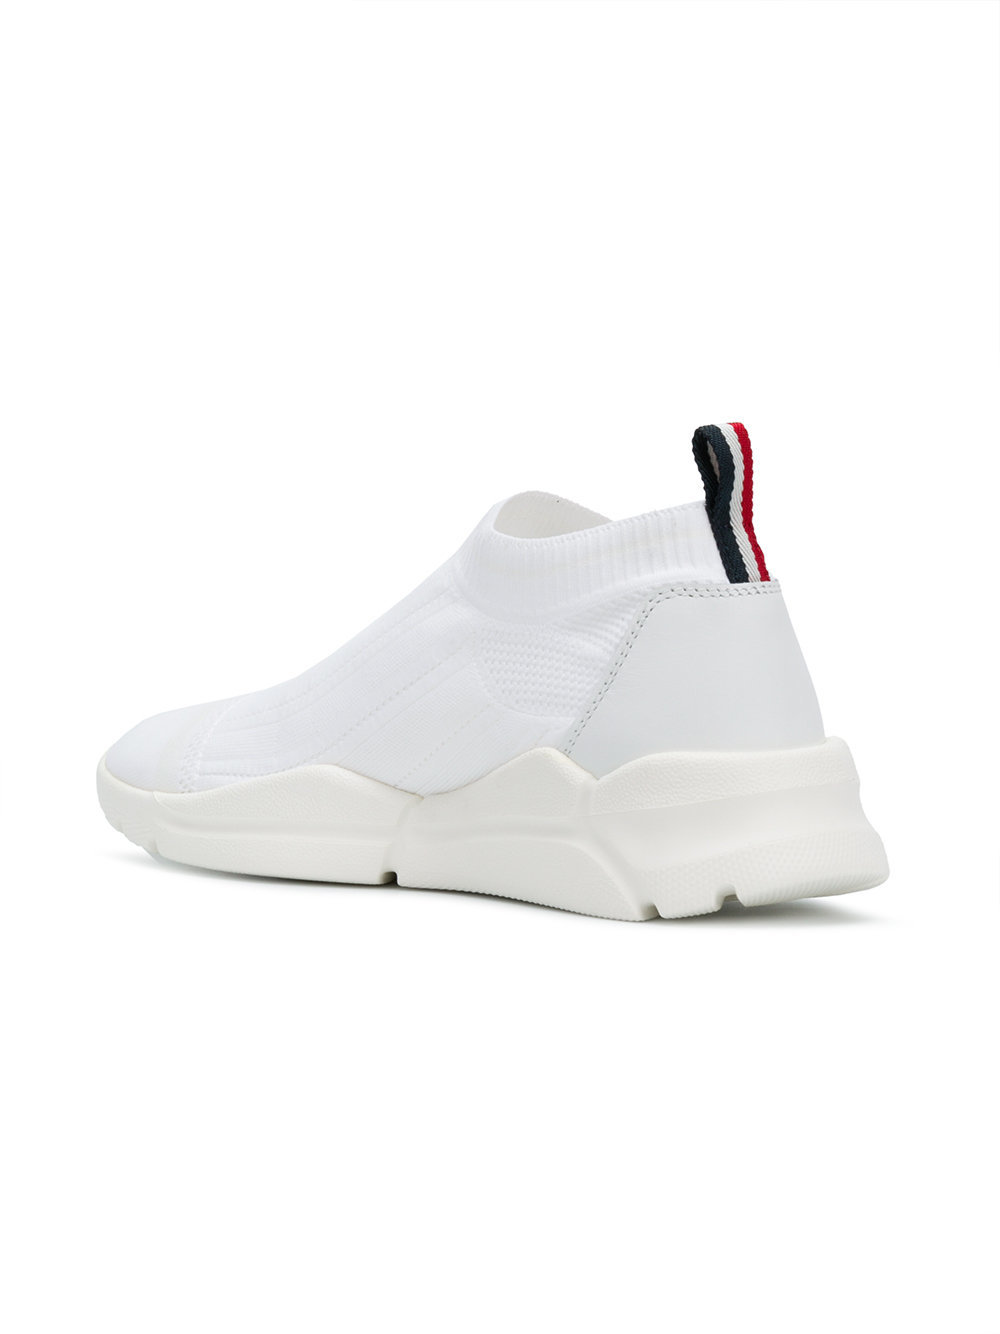 moncler adon slip on trainers